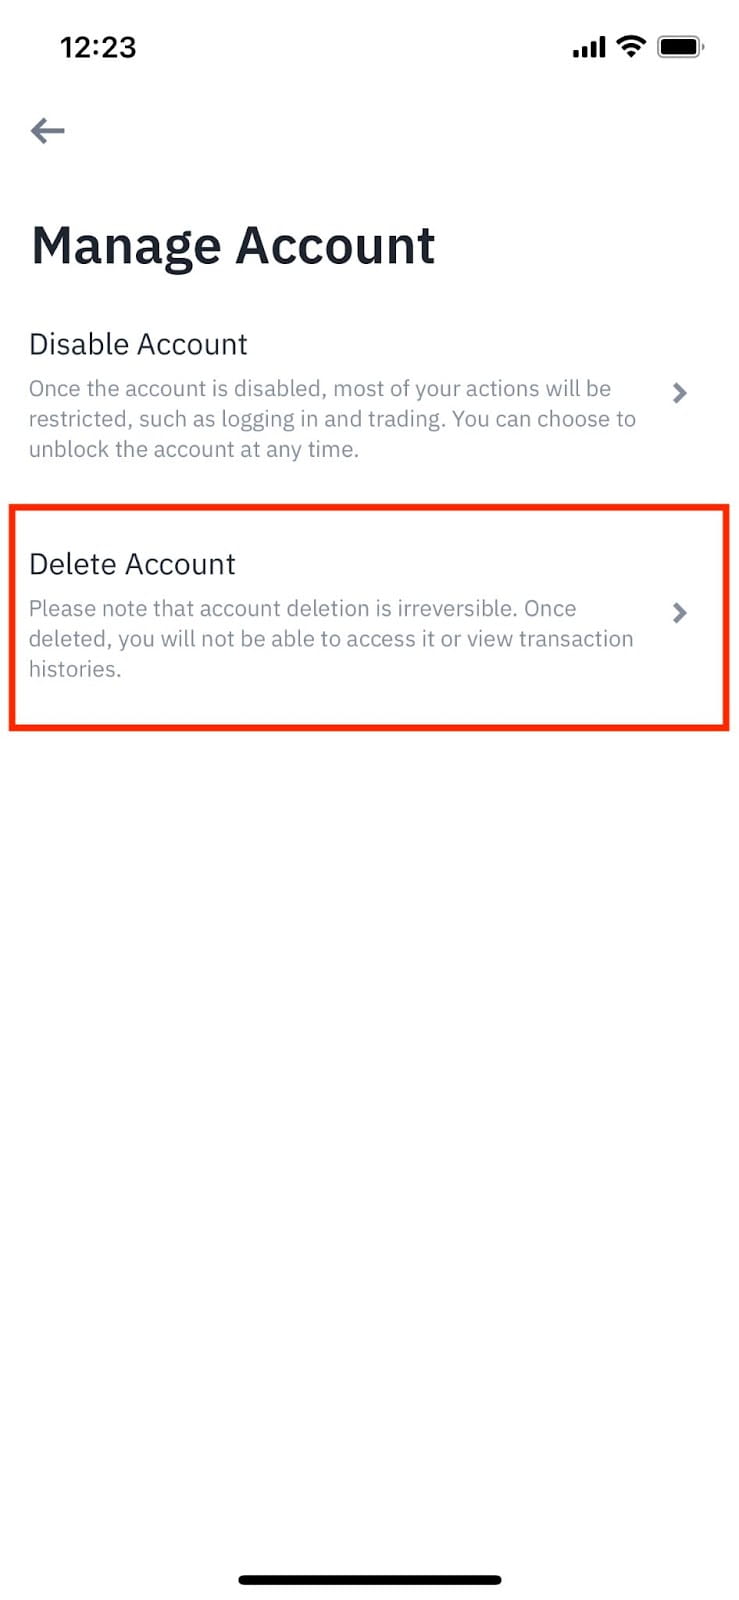 Instantly Delete Binance Account Step-By-Step - CryptoWinRate